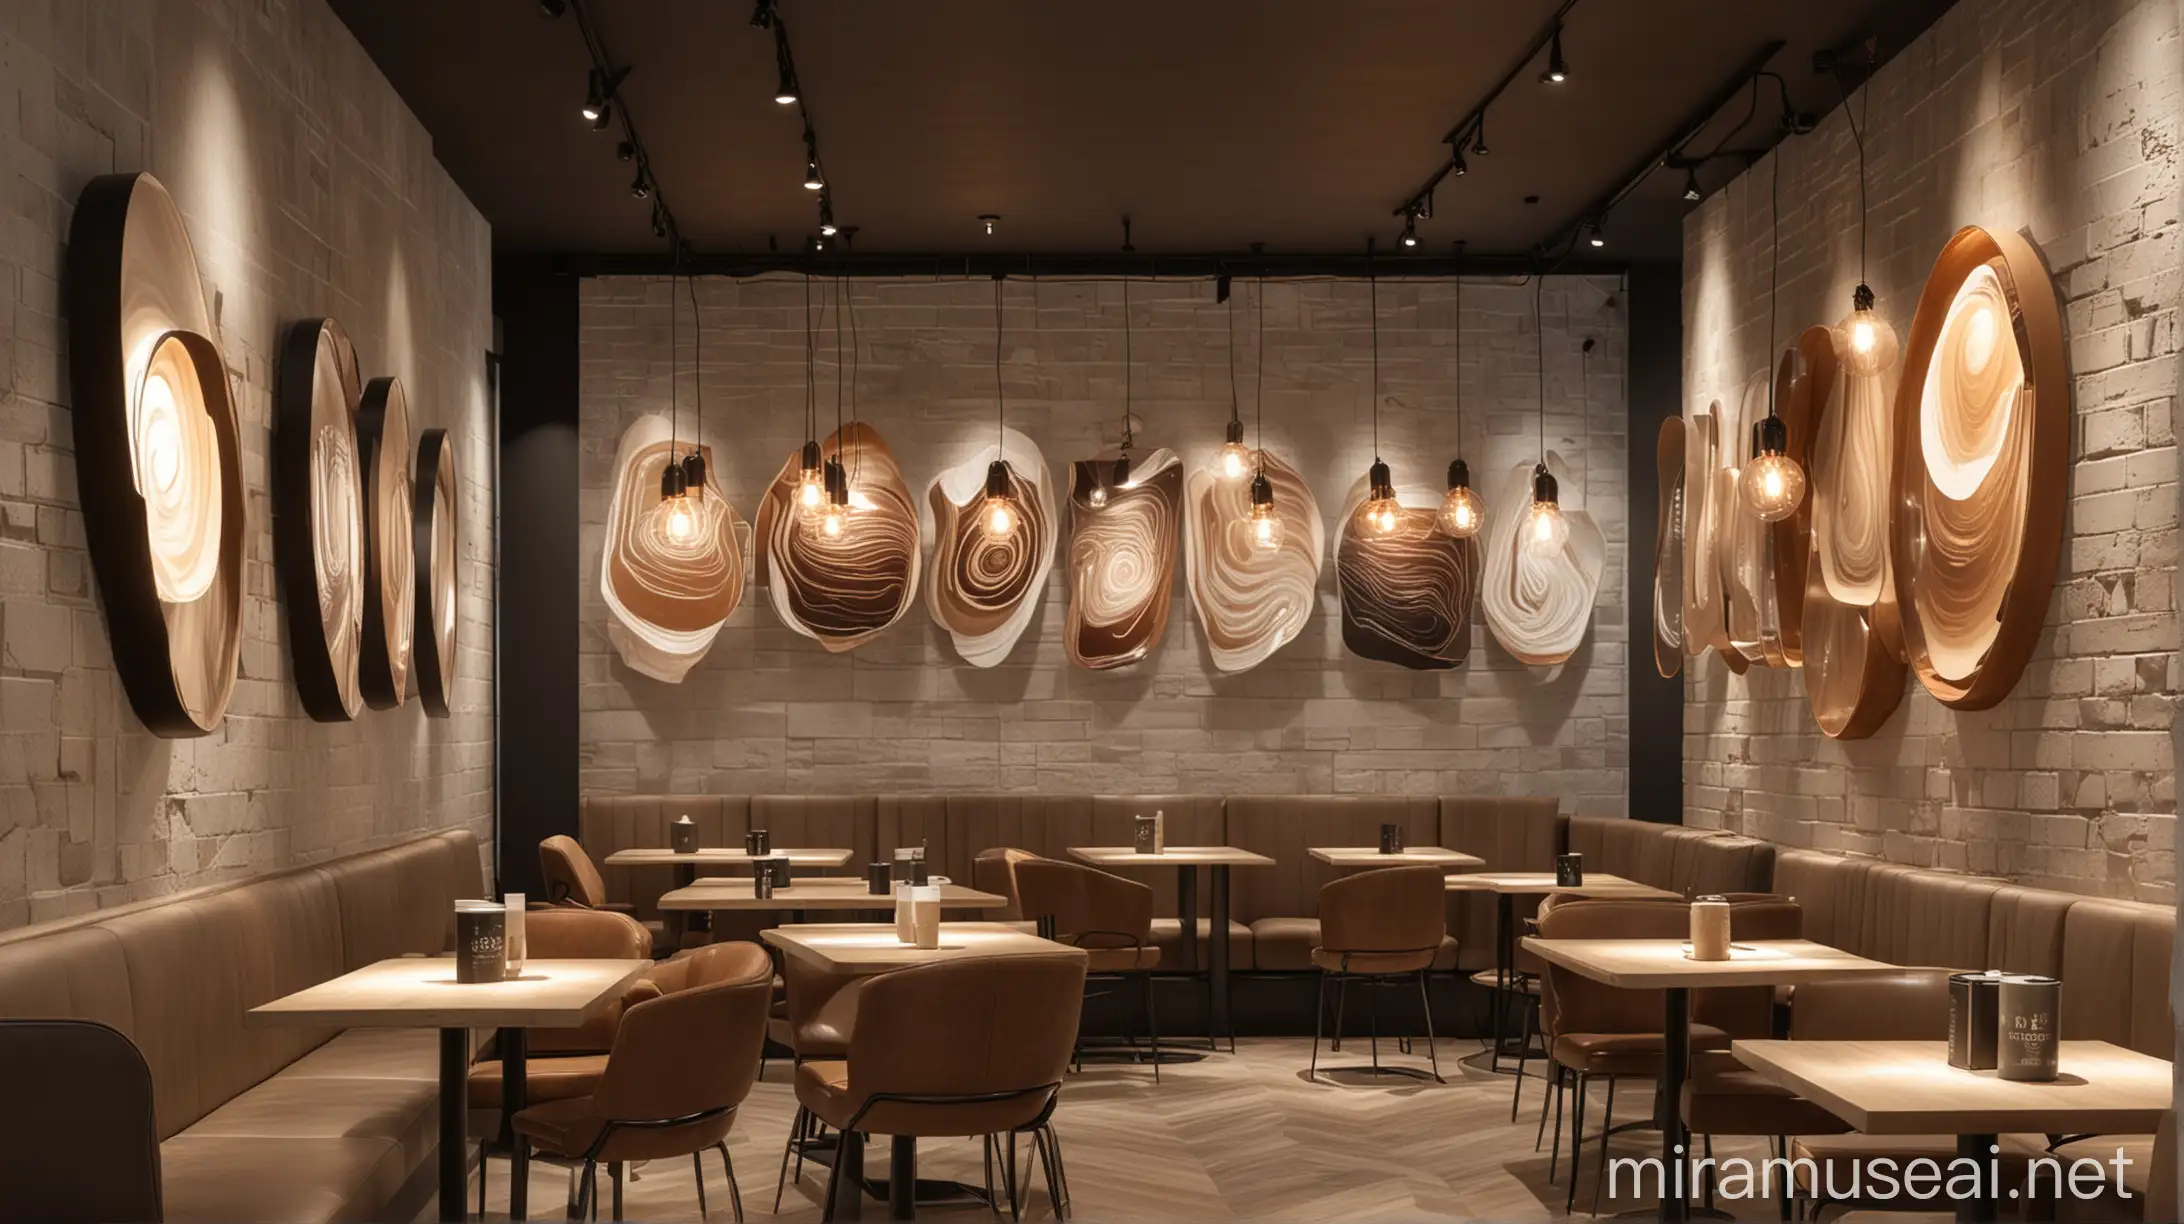 NeoModern Coffee Shop Interior with Indirect Lighting and Abstract Wall Decor